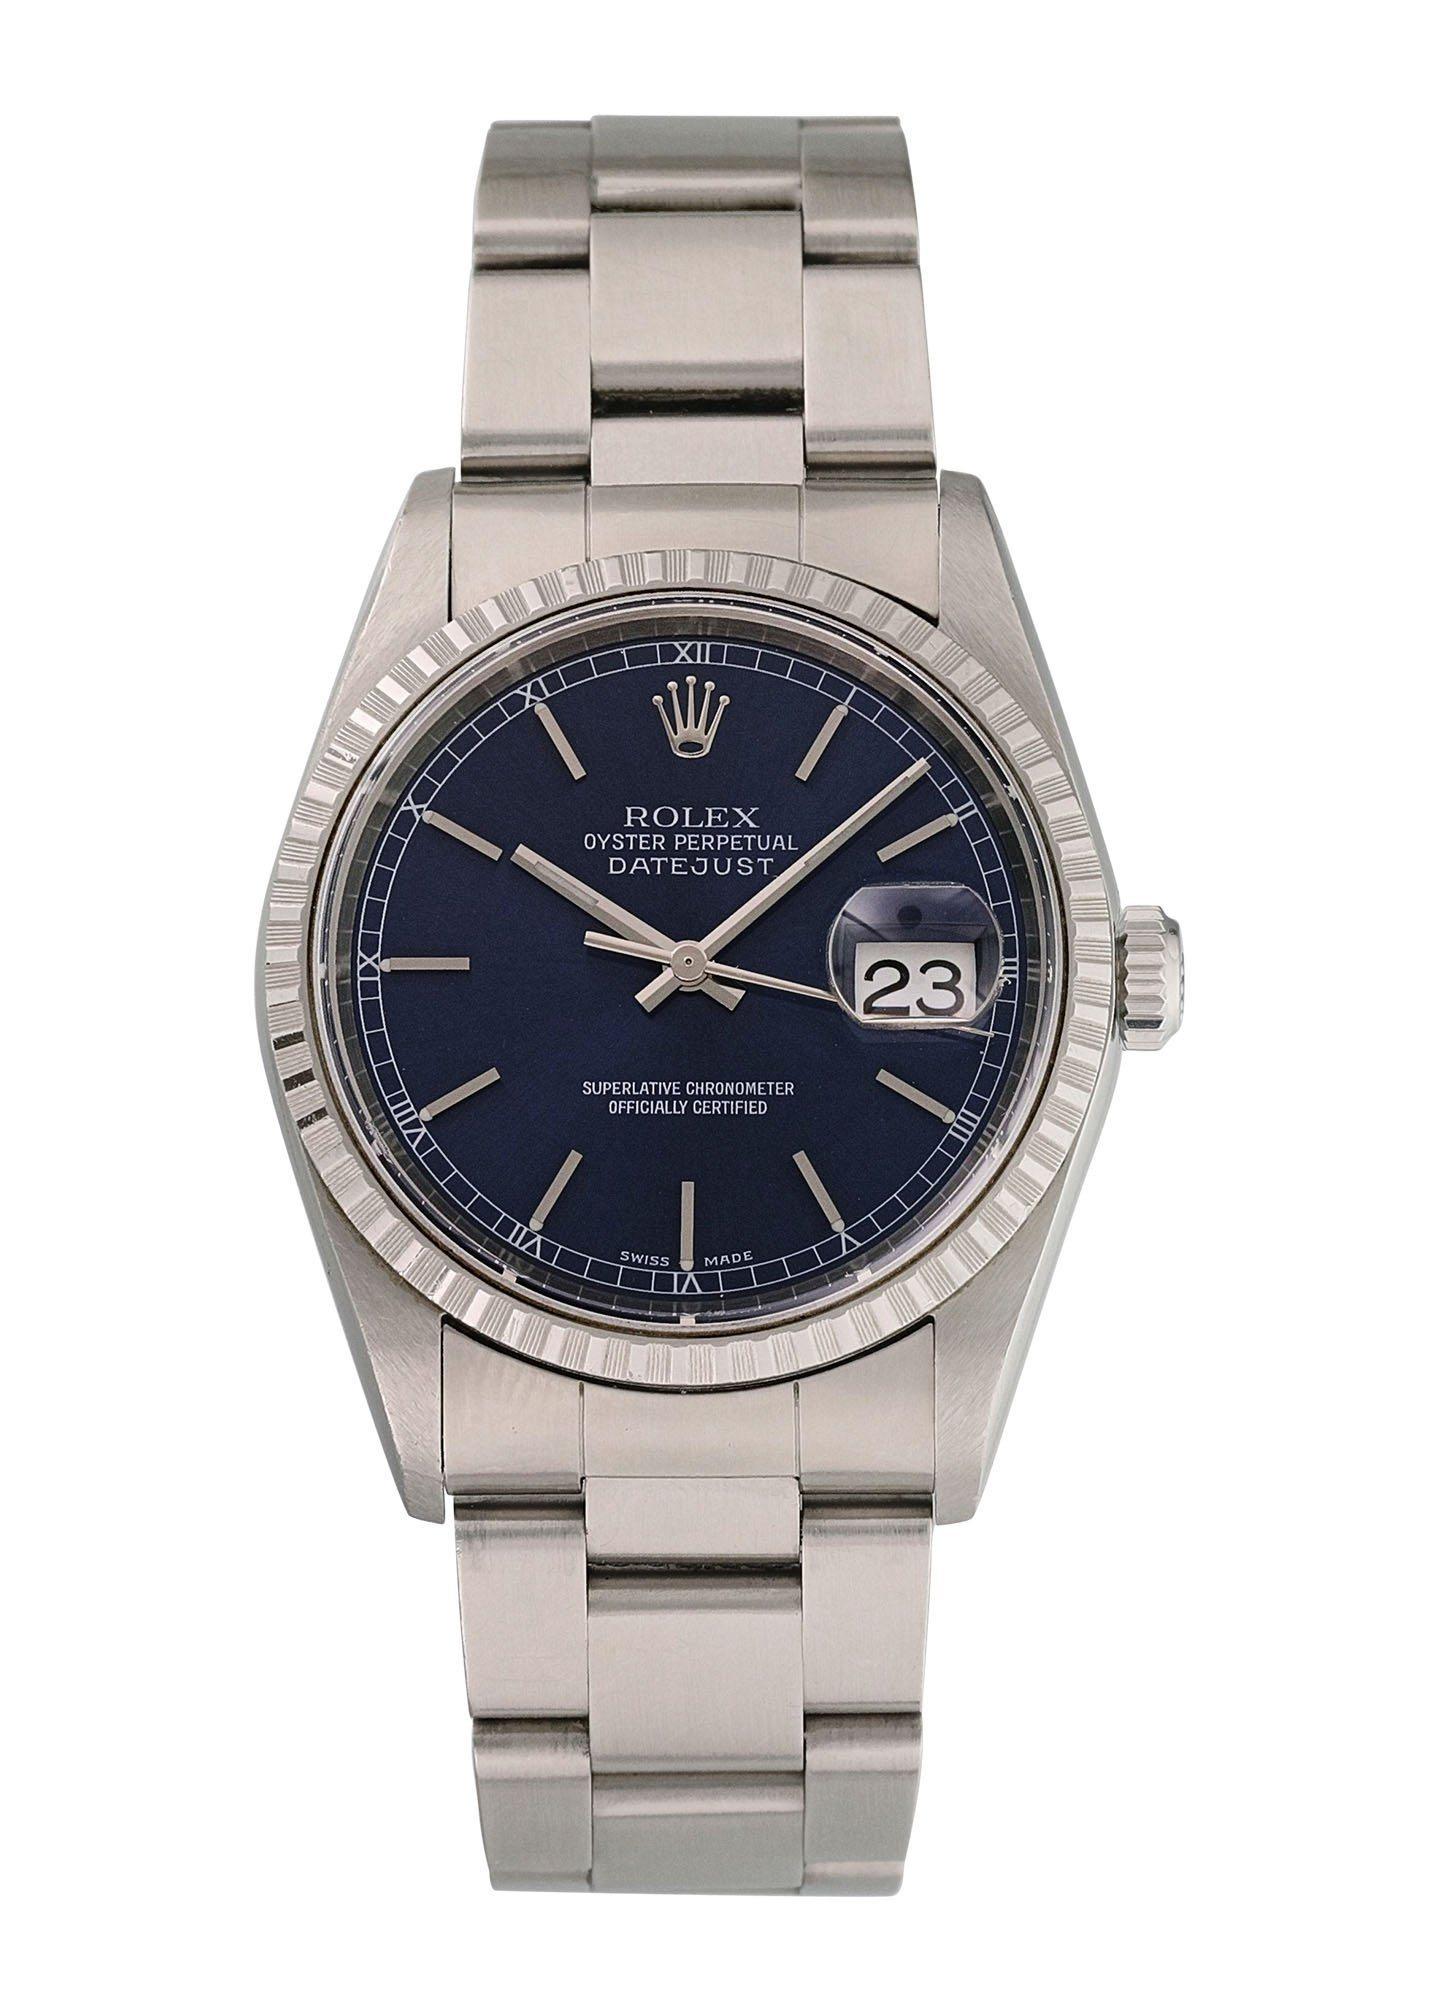 Rolex Datejust 16220 Men's Watch.
36mm Stainless Steel case. 
Stainless Steel engine turn bezel. 
Blue dial with Luminous Steel hands and index hour markers. 
Minute markers on the outer dial. 
Date display at the 3 o'clock position. 
Stainless